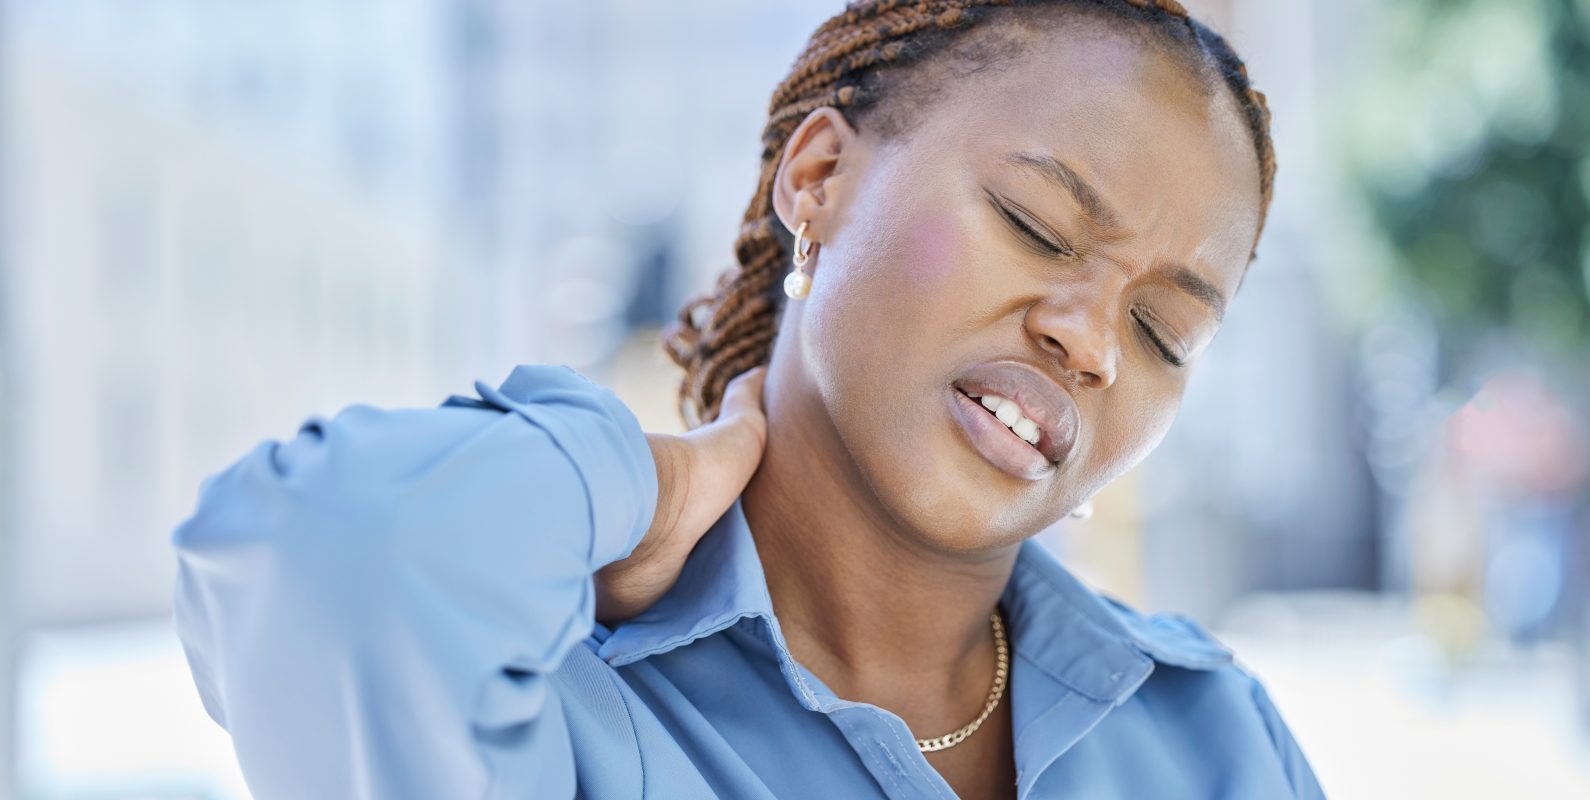 Woman manager with stress and pain in her neck while standing outside the office building. Female b.